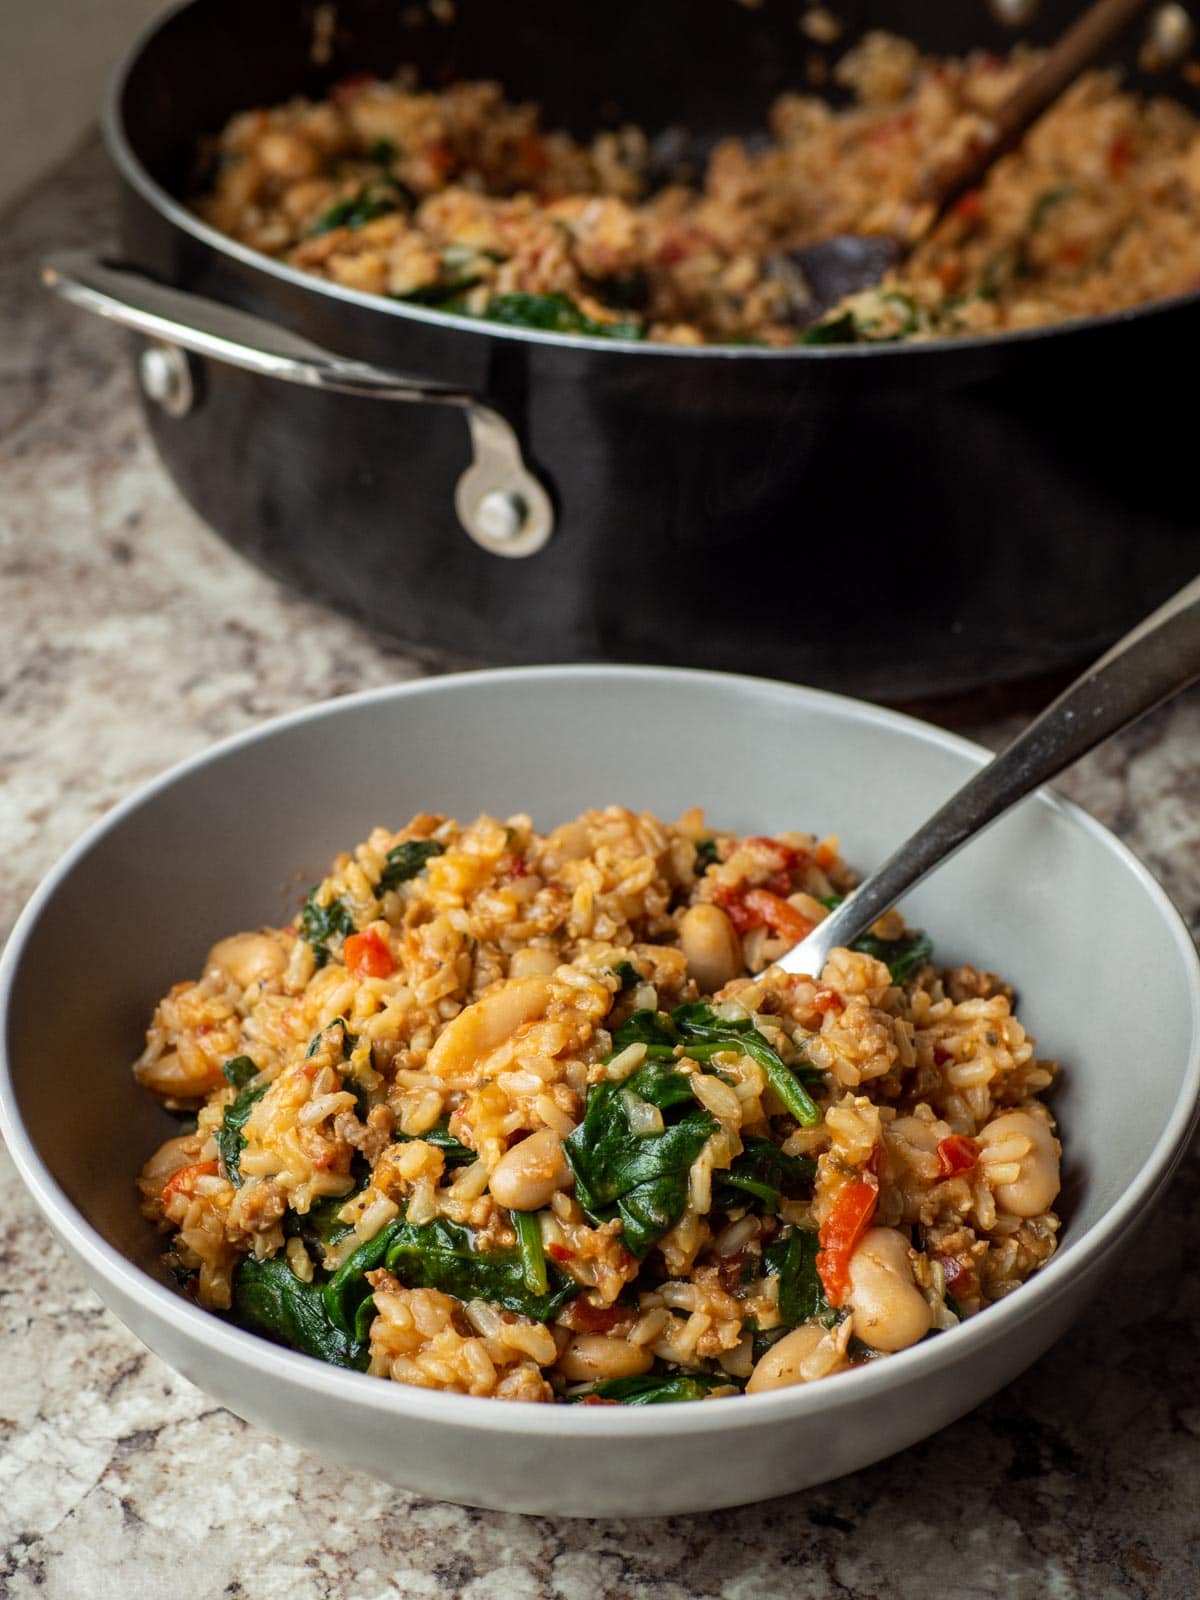 Bowl of Italian sausage and rice with peppers, spinach and white beans.